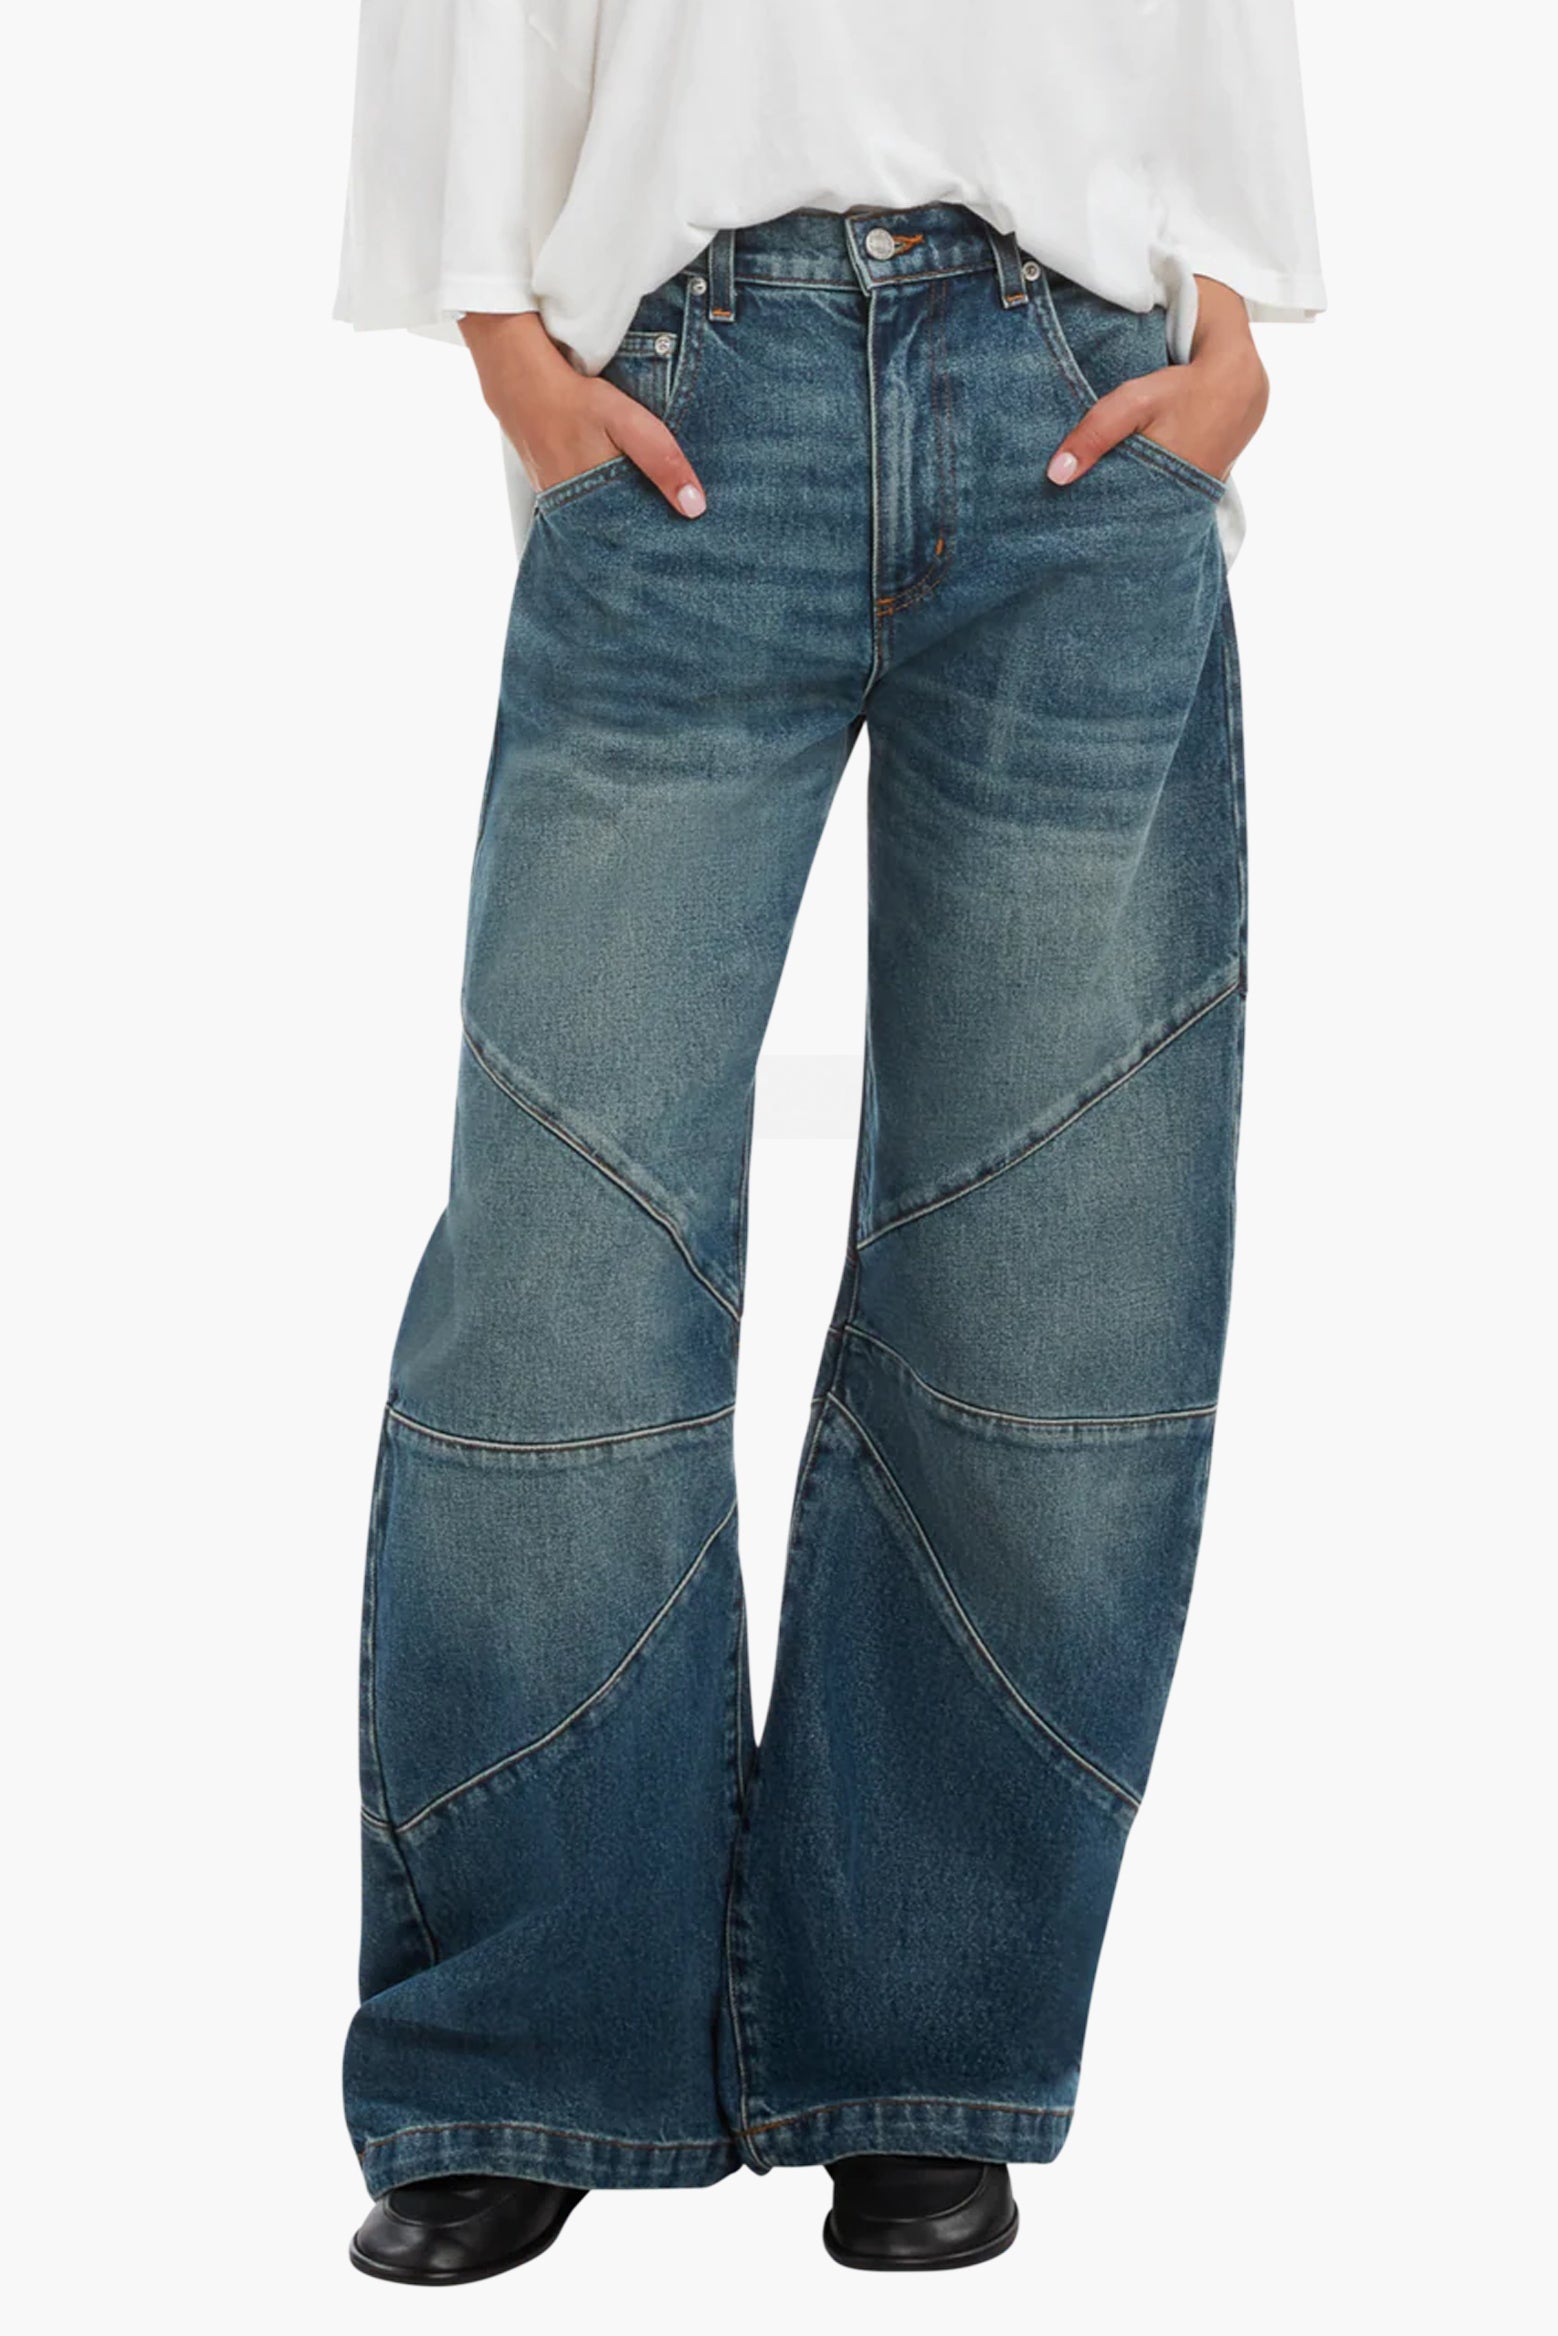 EB Denim Frederic Jean in Blue Denim available at The New Trend Australia.